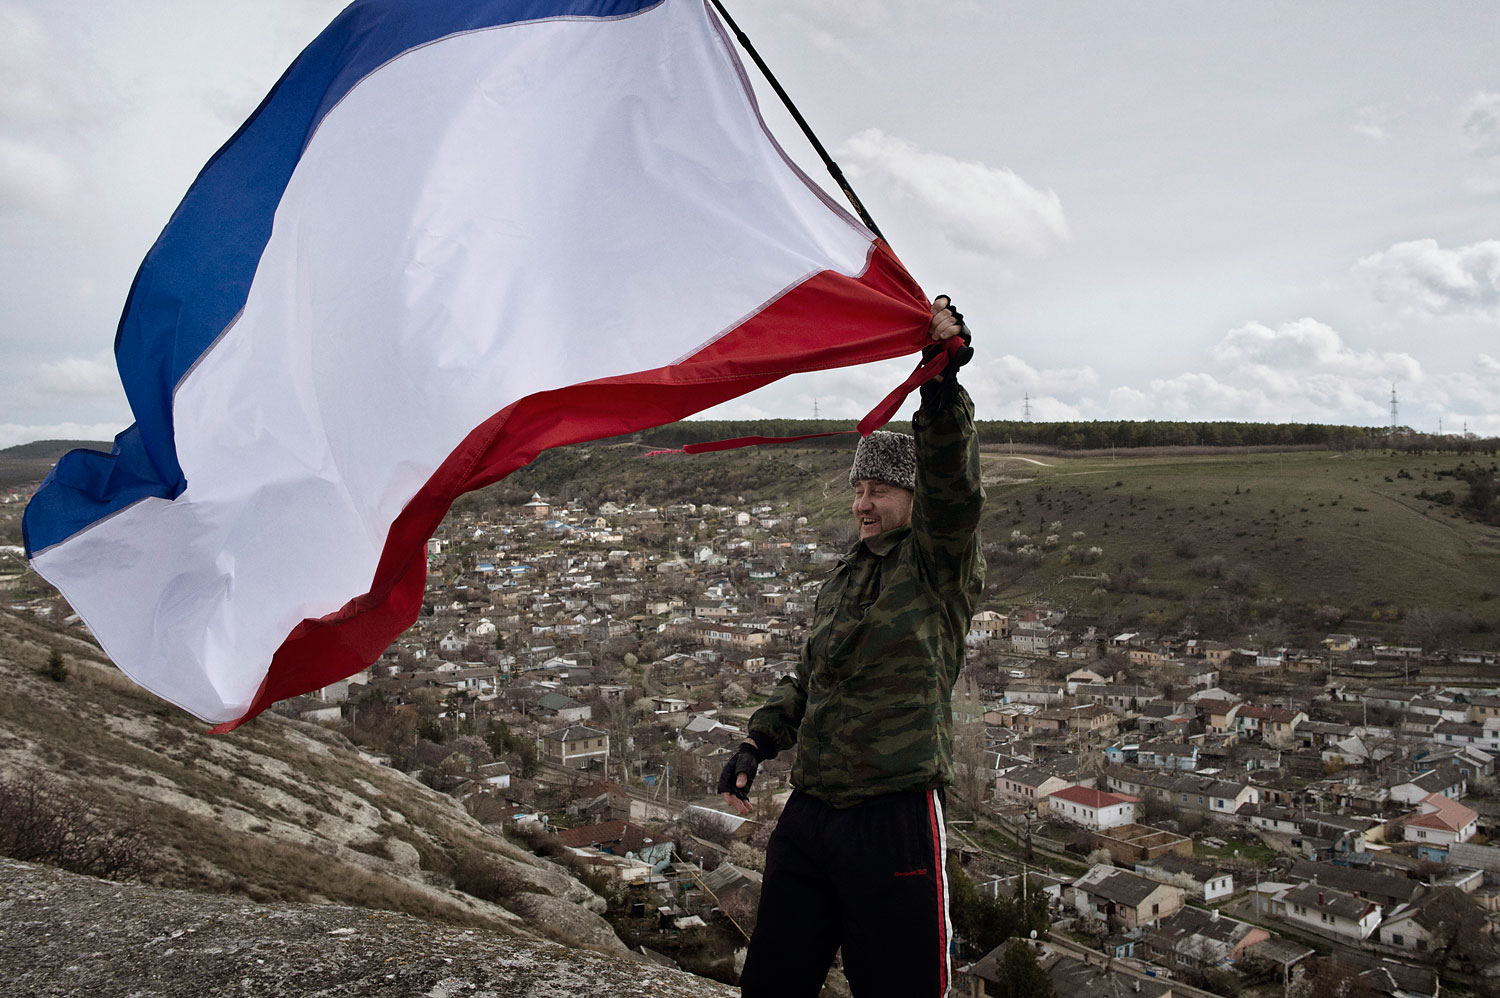 Sergei Yurchenko, the leader of a pro-Russian paramilitary force waves a Crimean flag on a lookout point over his hometown Bakhchysarai, on March 16, 2014.